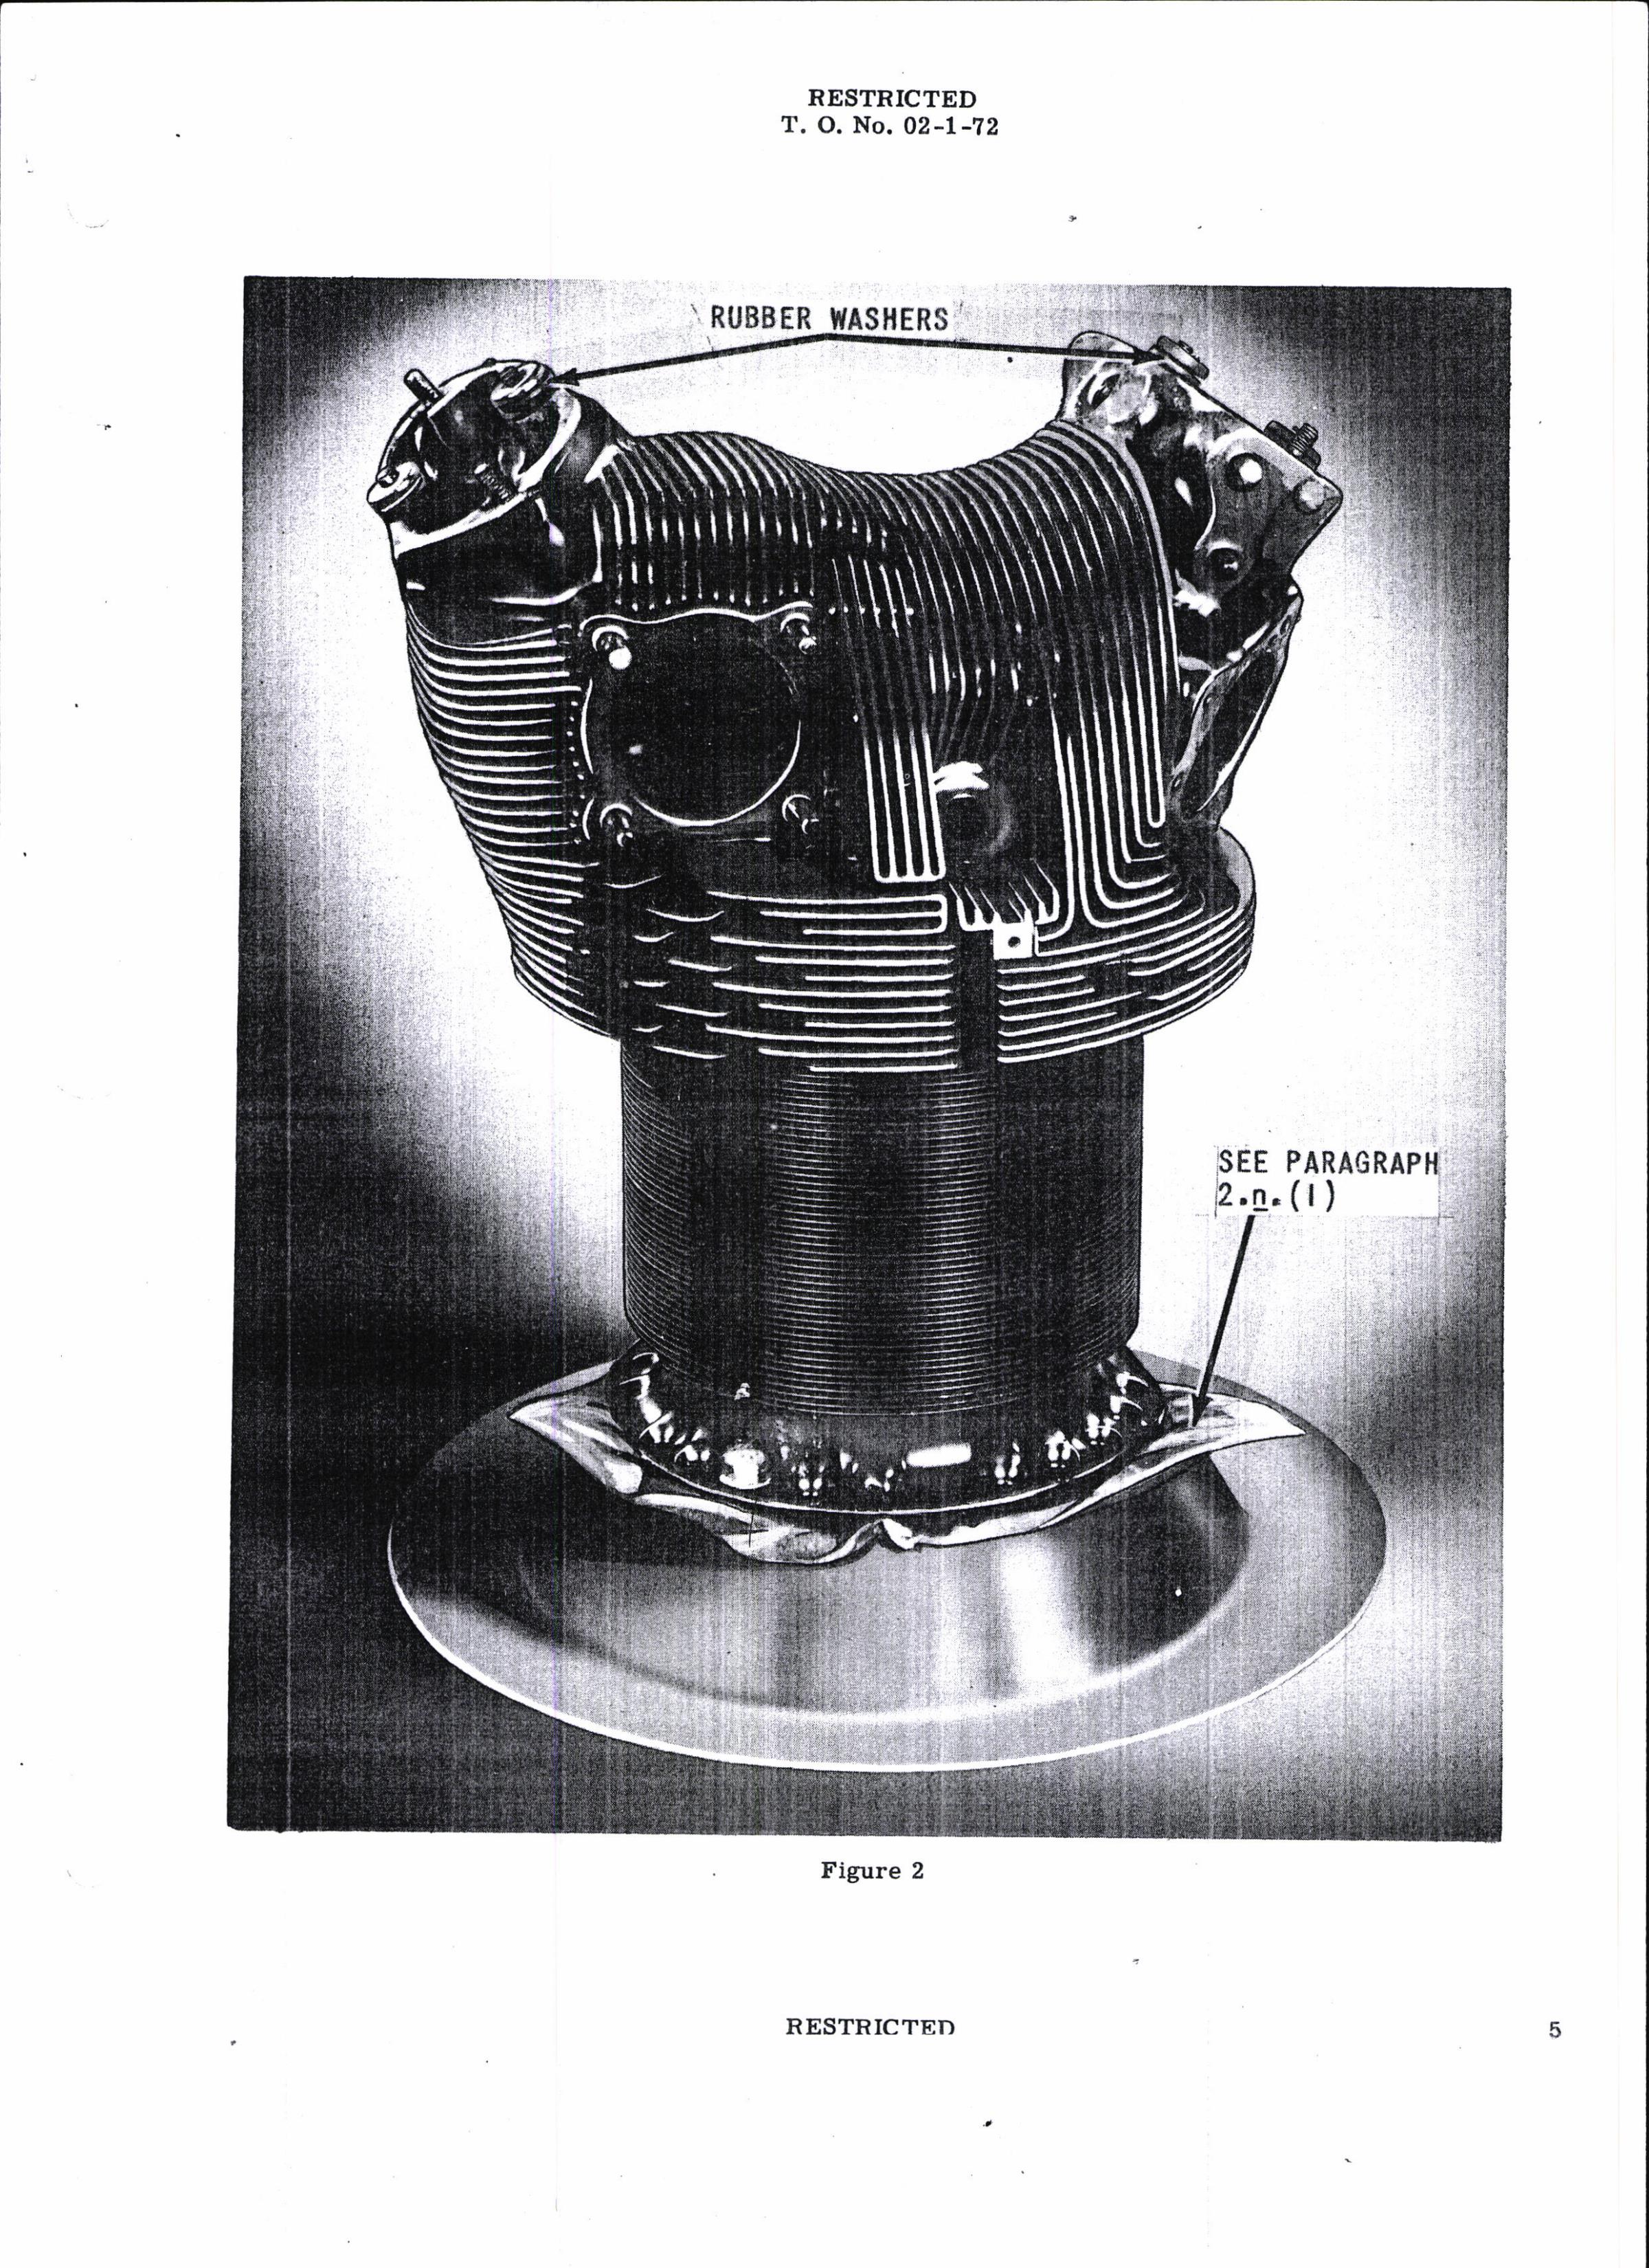 Sample page 5 from AirCorps Library document: Preparation of Aircraft Engine Cylinders for Chromium Plating